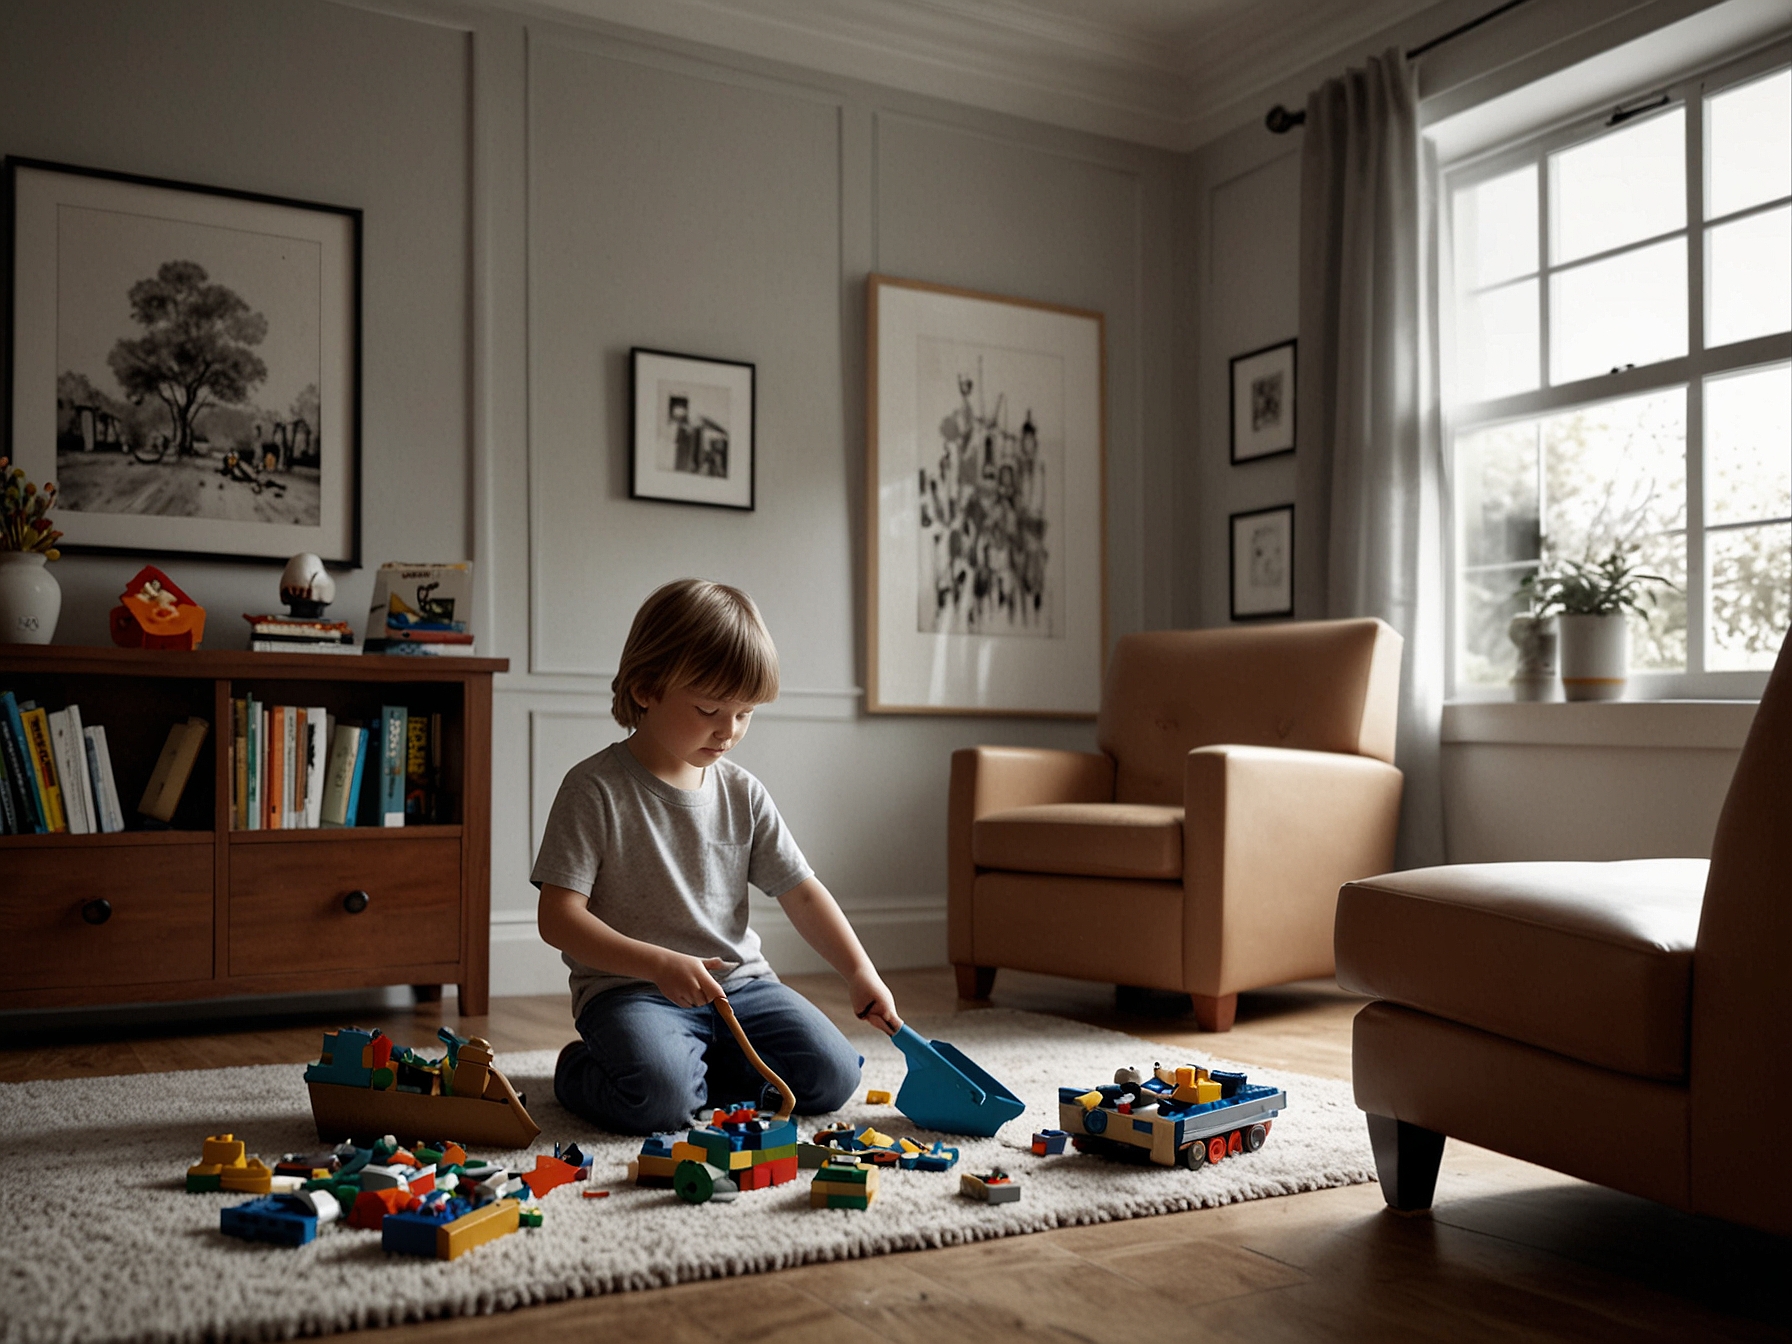 A clutter-free living room with kids playing, showcasing the effectiveness of Lynsey's dustpan and brush method for quick Lego cleanup.